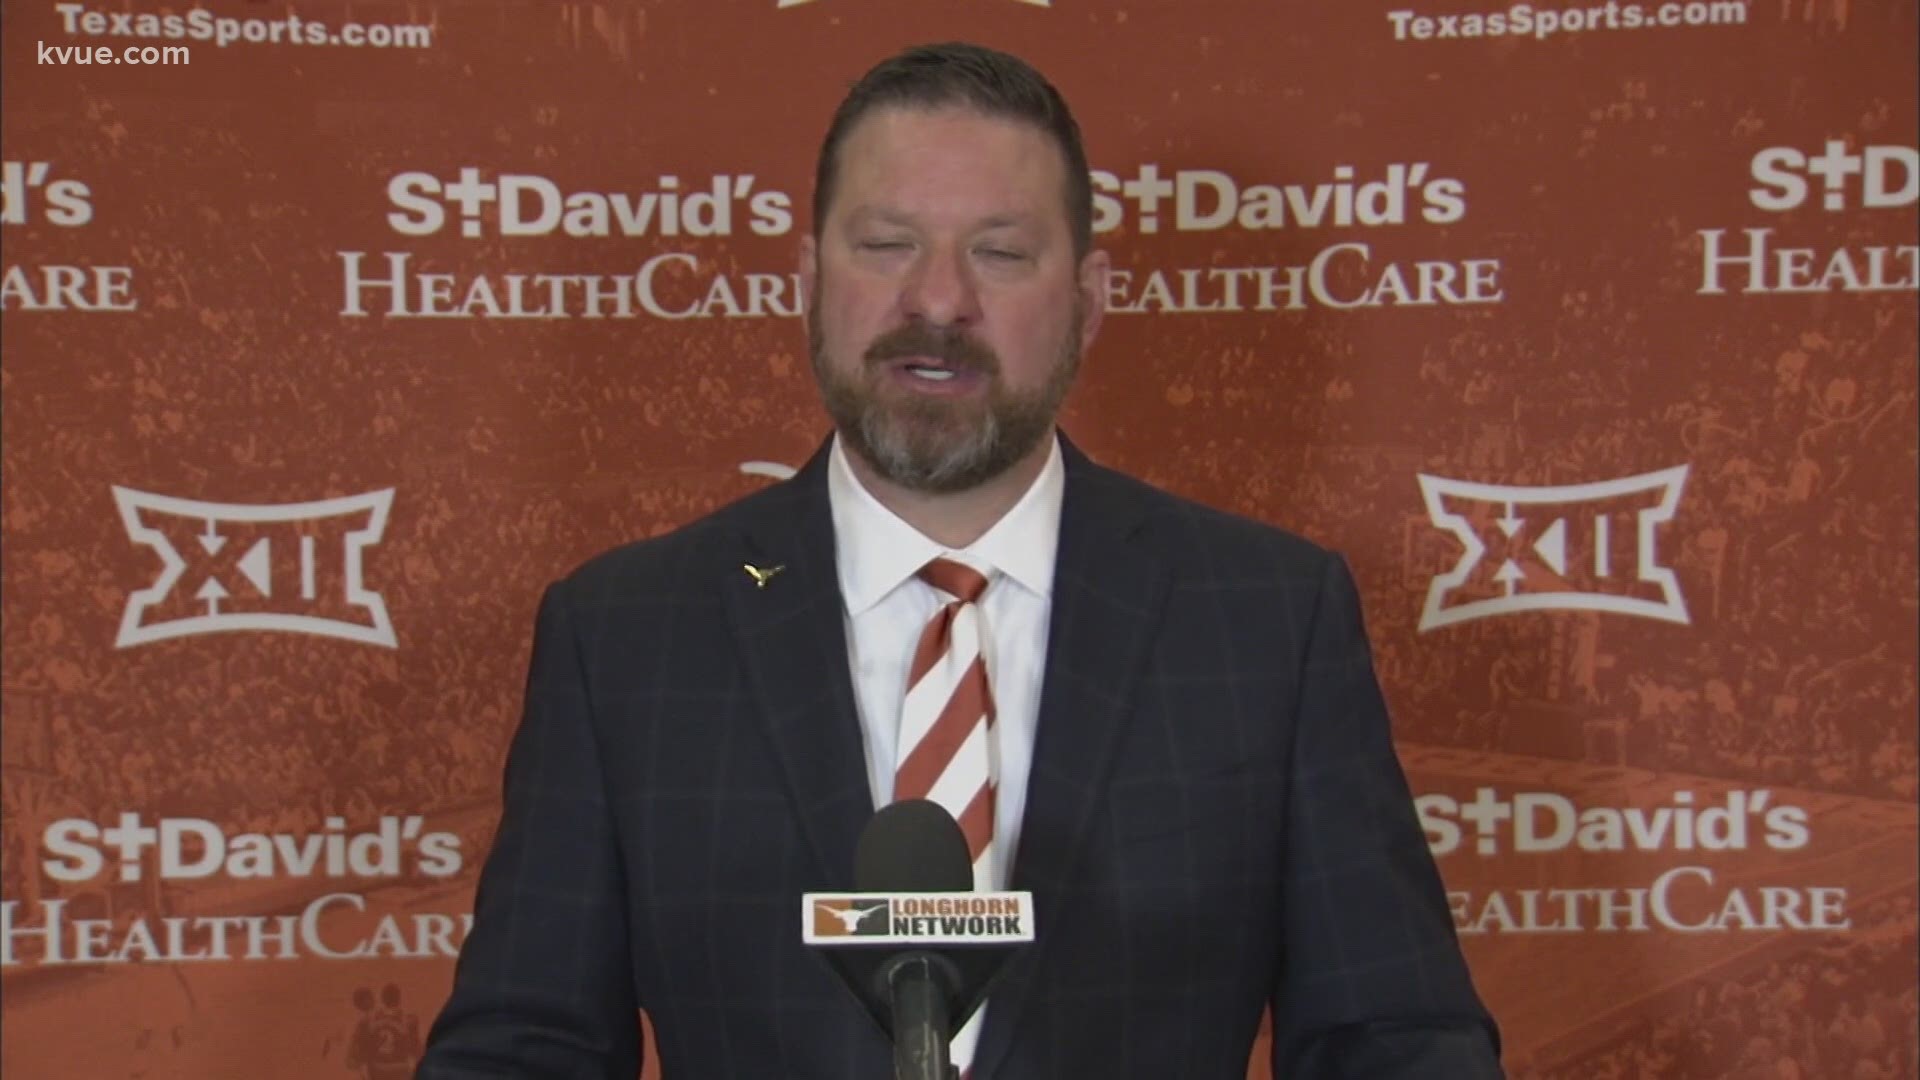 Coach Chris Beard promised to build a tough, disciplined team and to "unite the Texas family" by adding a few former Longhorns to his staff.